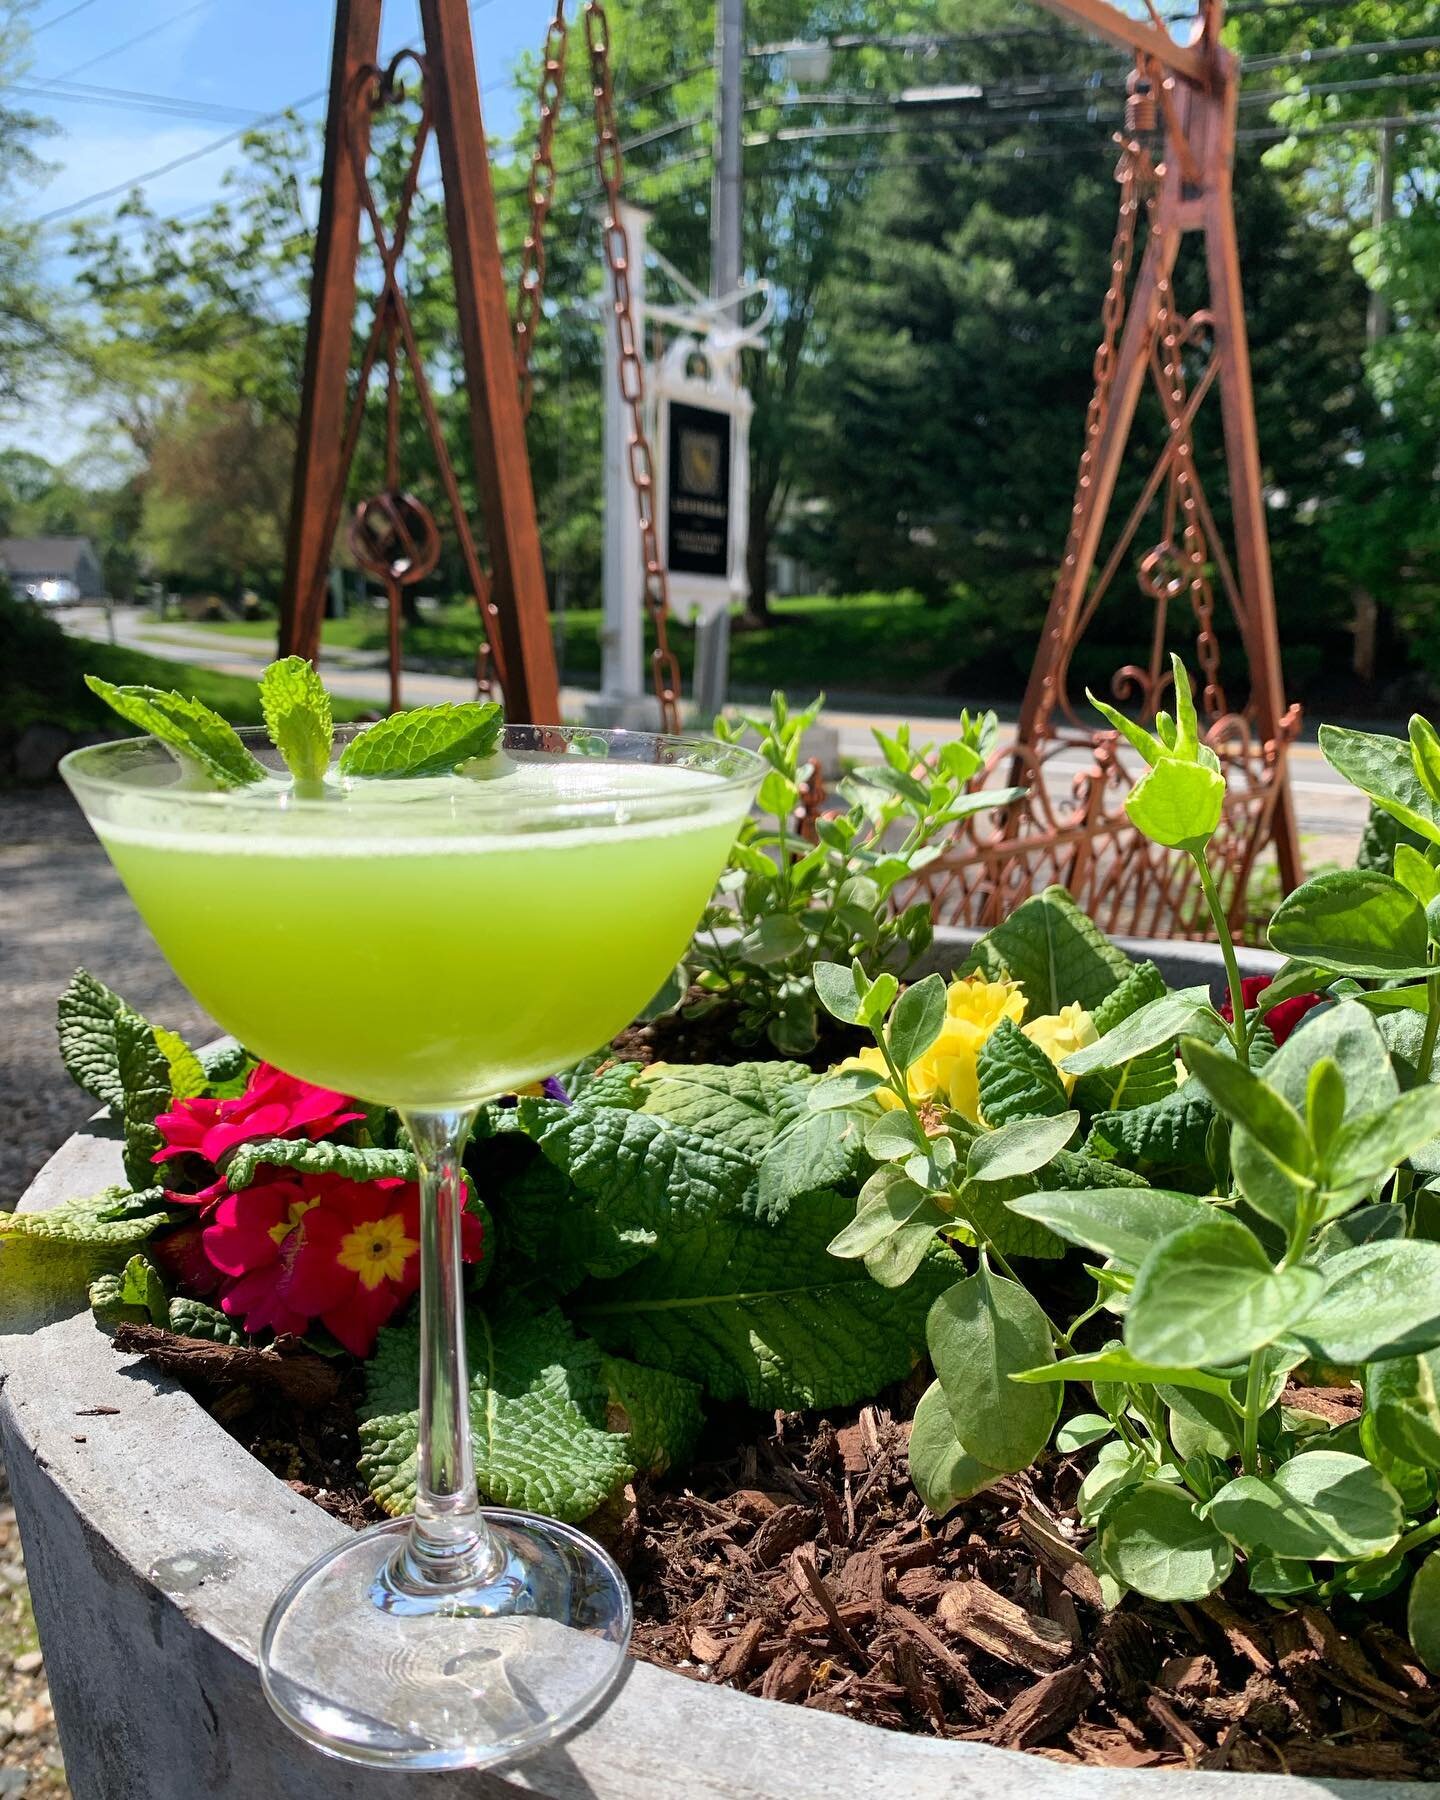 Cheers to the beautiful weather! Featuring the Cucumber Spring Waltz with Chopin Vodka, Lillet, Lemon, and House Made Cucumber Syrup. #happymothersdayweekend #beautiful #springhassprung #yarmouthport #capecod